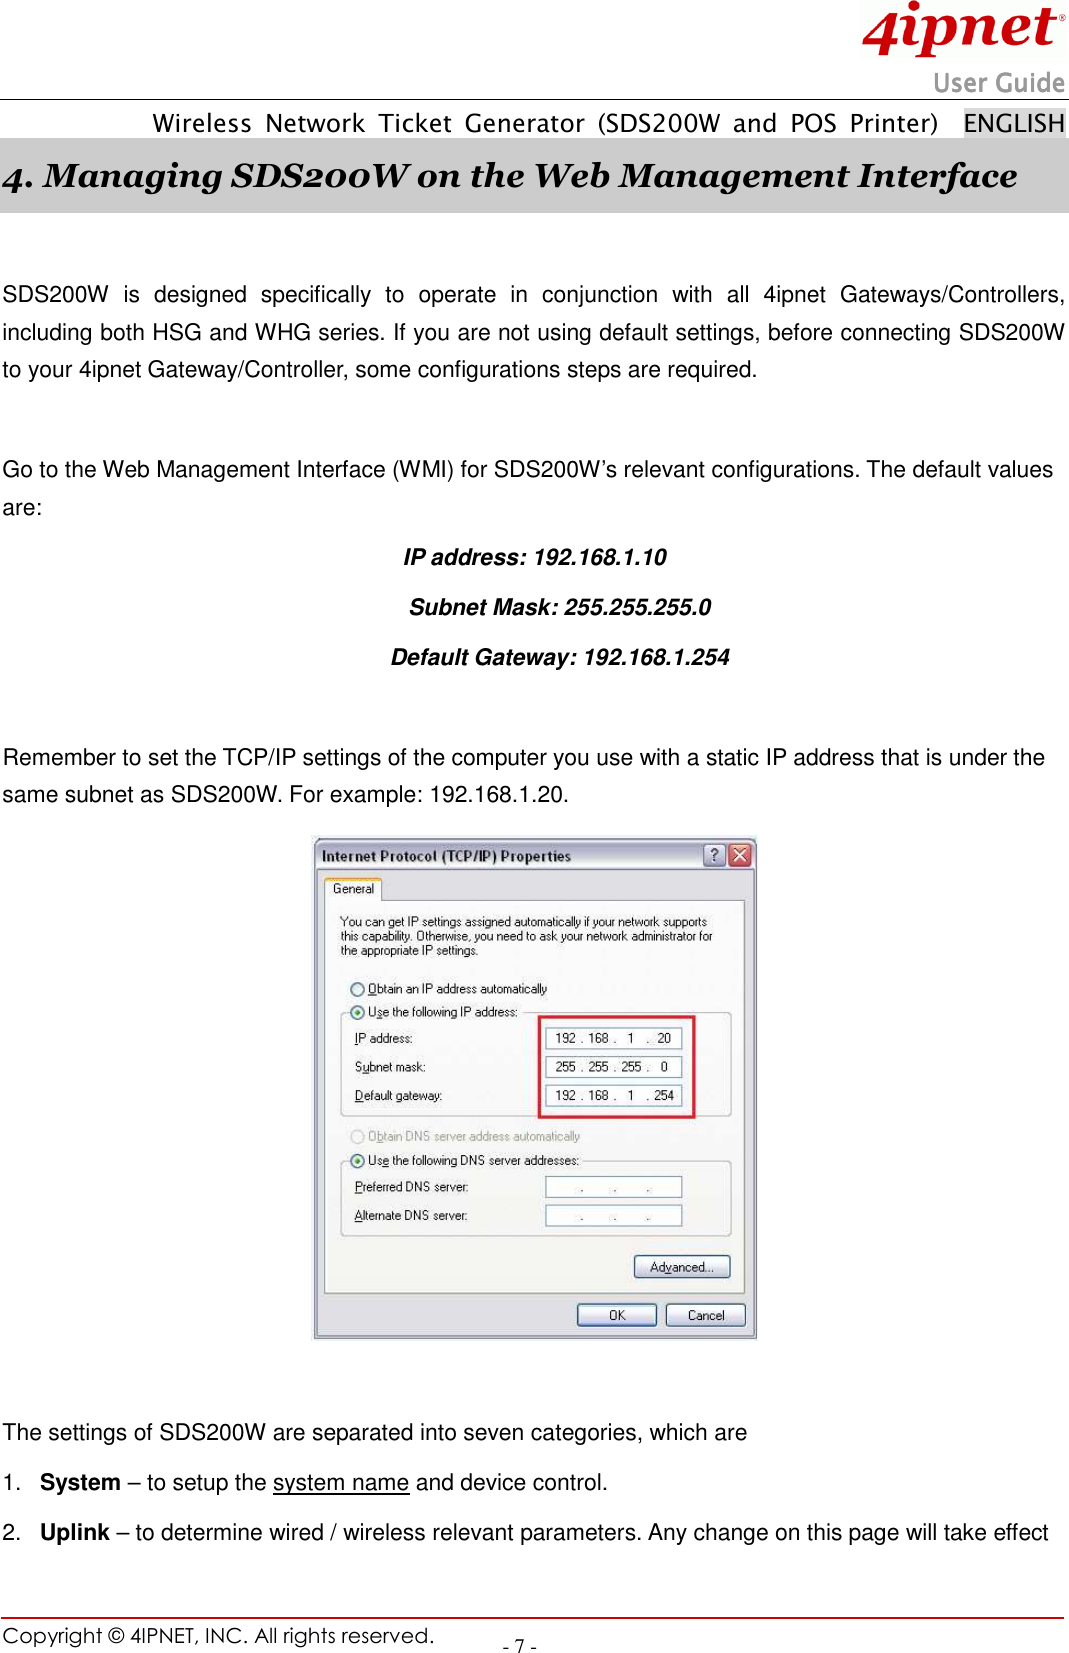                                                                        UserUserUserUser Guide Guide Guide Guide         Wireless  Network  Ticket  Generator  (SDS200W  and  POS  Printer)    ENGLISH Copyright © 4IPNET, INC. All rights reserved.    - 7 - 4. Managing SDS200W on the Web Management Interface      SDS200W  is  designed  specifically  to  operate  in  conjunction  with  all  4ipnet  Gateways/Controllers, including both HSG and WHG series. If you are not using default settings, before connecting SDS200W to your 4ipnet Gateway/Controller, some configurations steps are required.  Go to the Web Management Interface (WMI) for SDS200W’s relevant configurations. The default values are:   IP address: 192.168.1.10 Subnet Mask: 255.255.255.0 Default Gateway: 192.168.1.254  Remember to set the TCP/IP settings of the computer you use with a static IP address that is under the same subnet as SDS200W. For example: 192.168.1.20.     The settings of SDS200W are separated into seven categories, which are 1.  System – to setup the system name and device control.   2.  Uplink – to determine wired / wireless relevant parameters. Any change on this page will take effect 